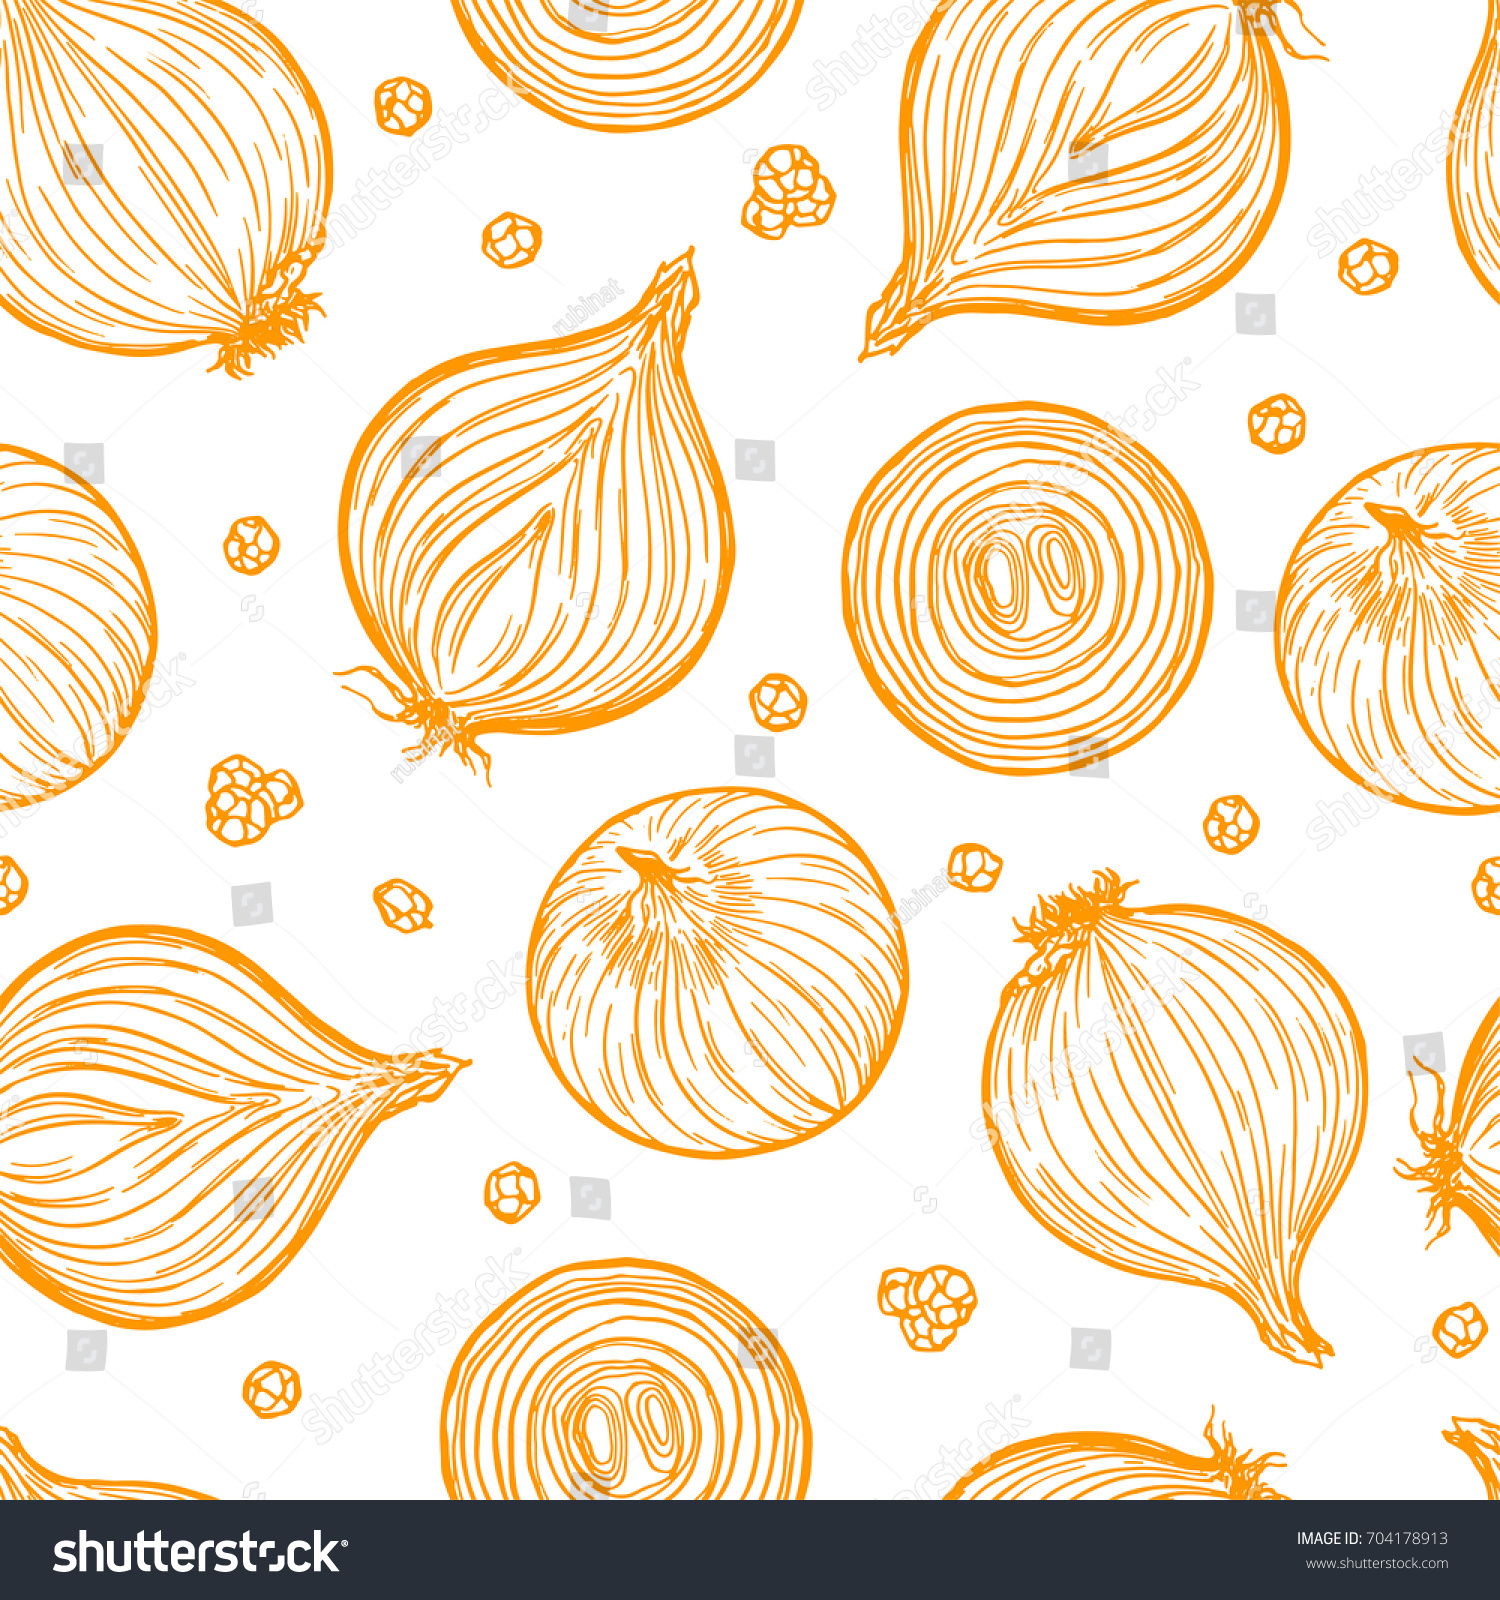 Pretty sketched seamless pattern made of hand drawn onion. #704178913